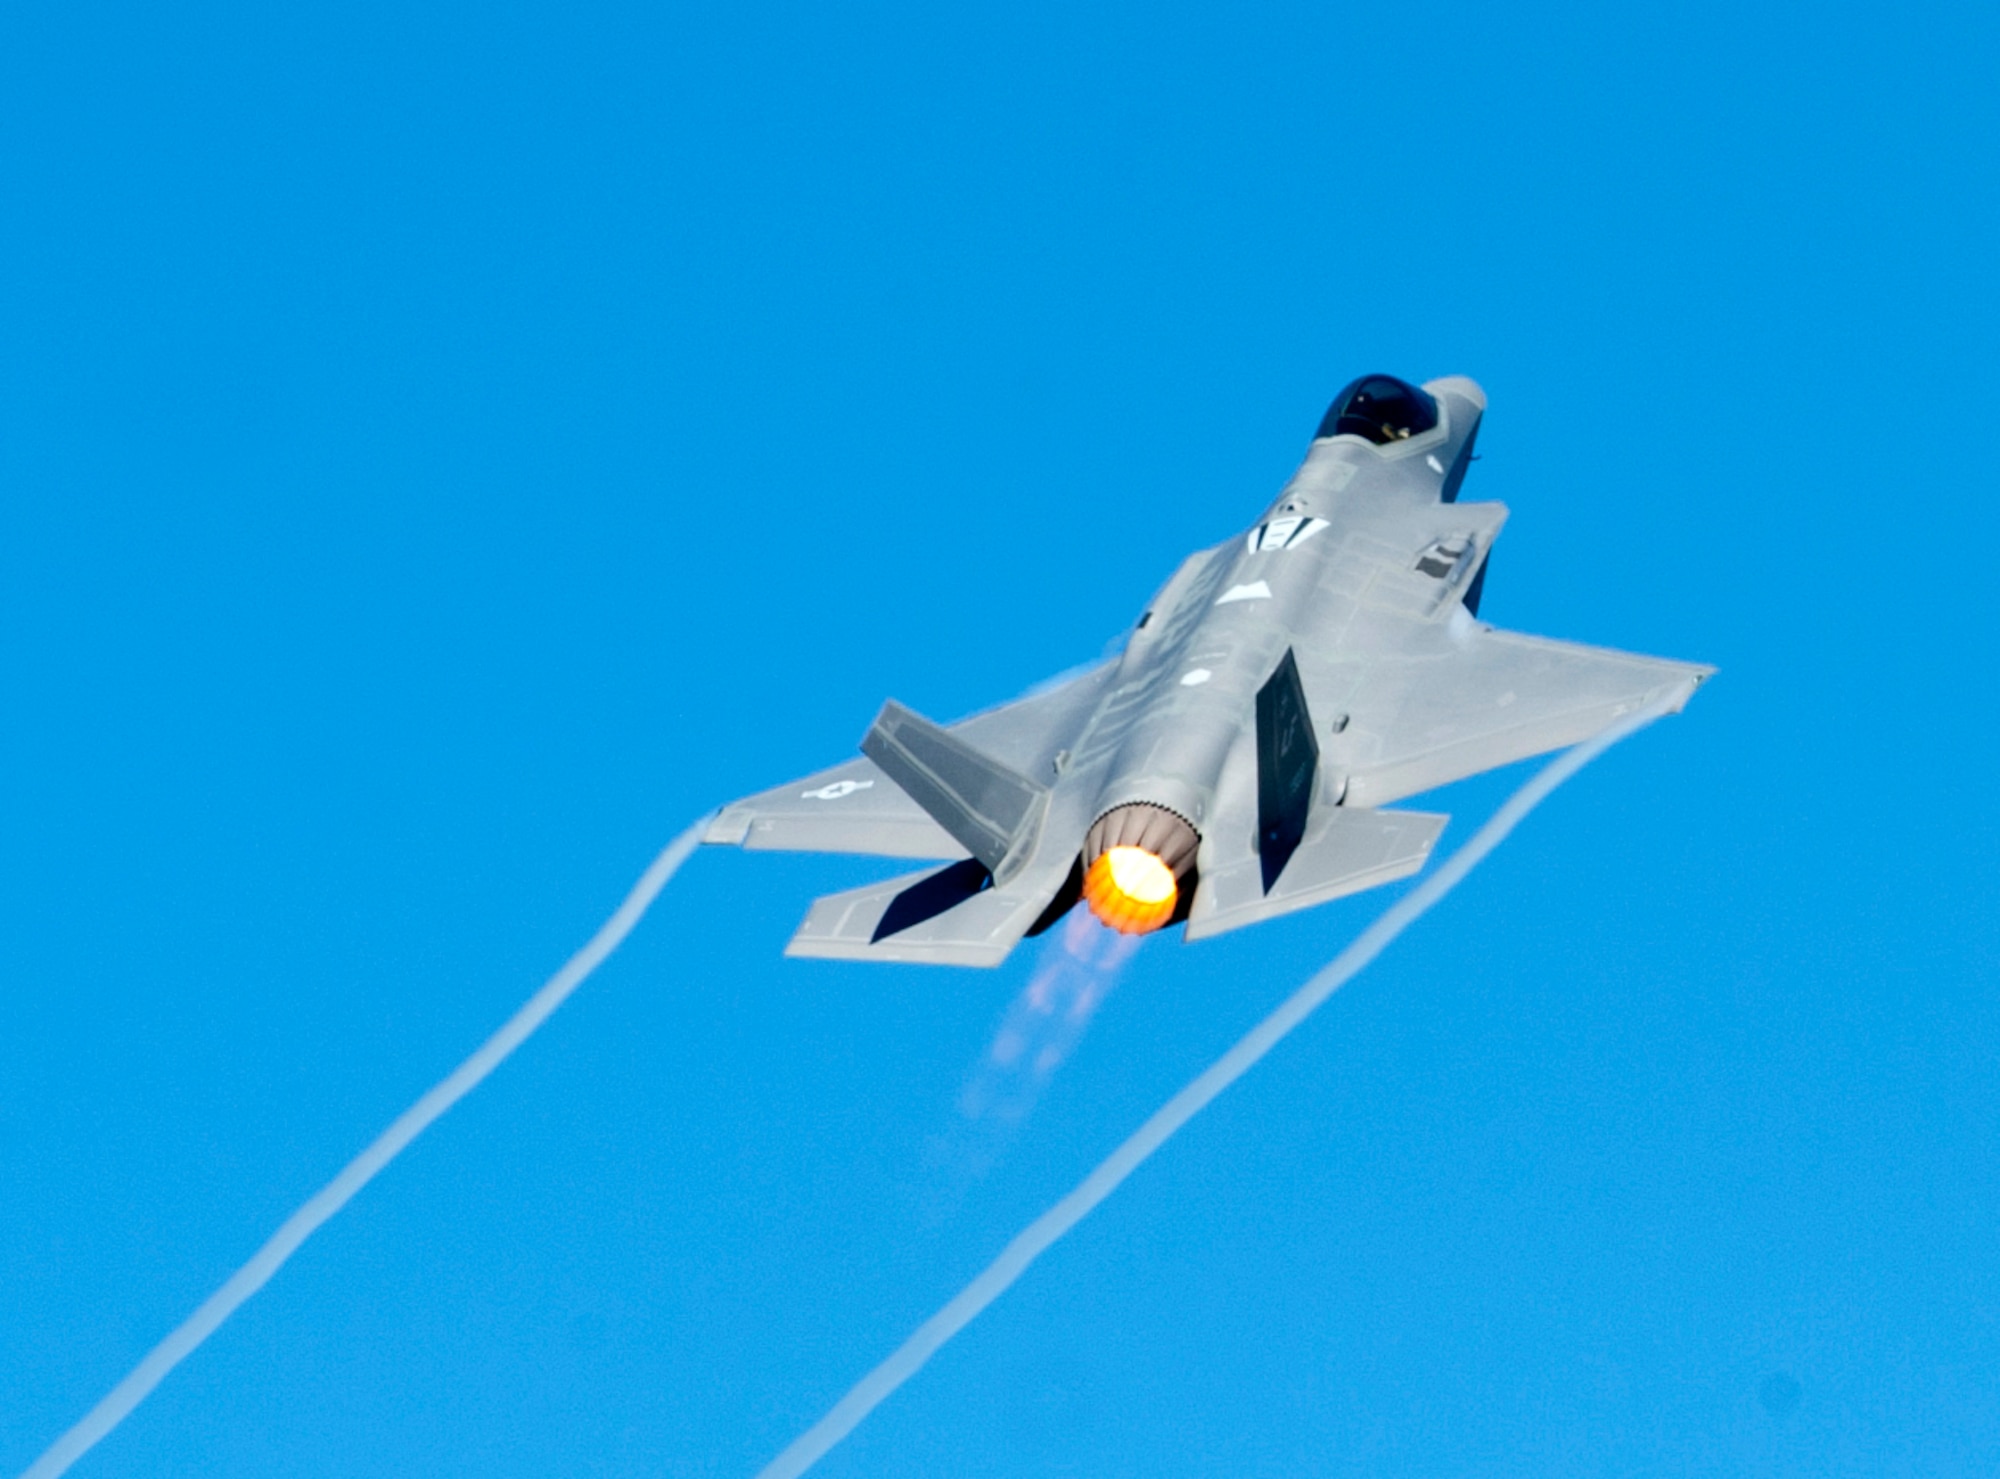 A U.S. Air Force F-35 Lightning II demonstration aircraft takes off during the AirPower over Hampton Roads Open House at Langley Air Force Base, Va., April 24, 2016. The aircraft performed alongside and F-22 Raptor and a P-51 Mustang as part of the Heritage Flight Program, which showcases the evolution of air power by flying today's state-of-the-art fighter aircraft in close formation with vintage fighter aircraft. (U.S. Air Force photo by Senior Airman R. Alex Durbin)